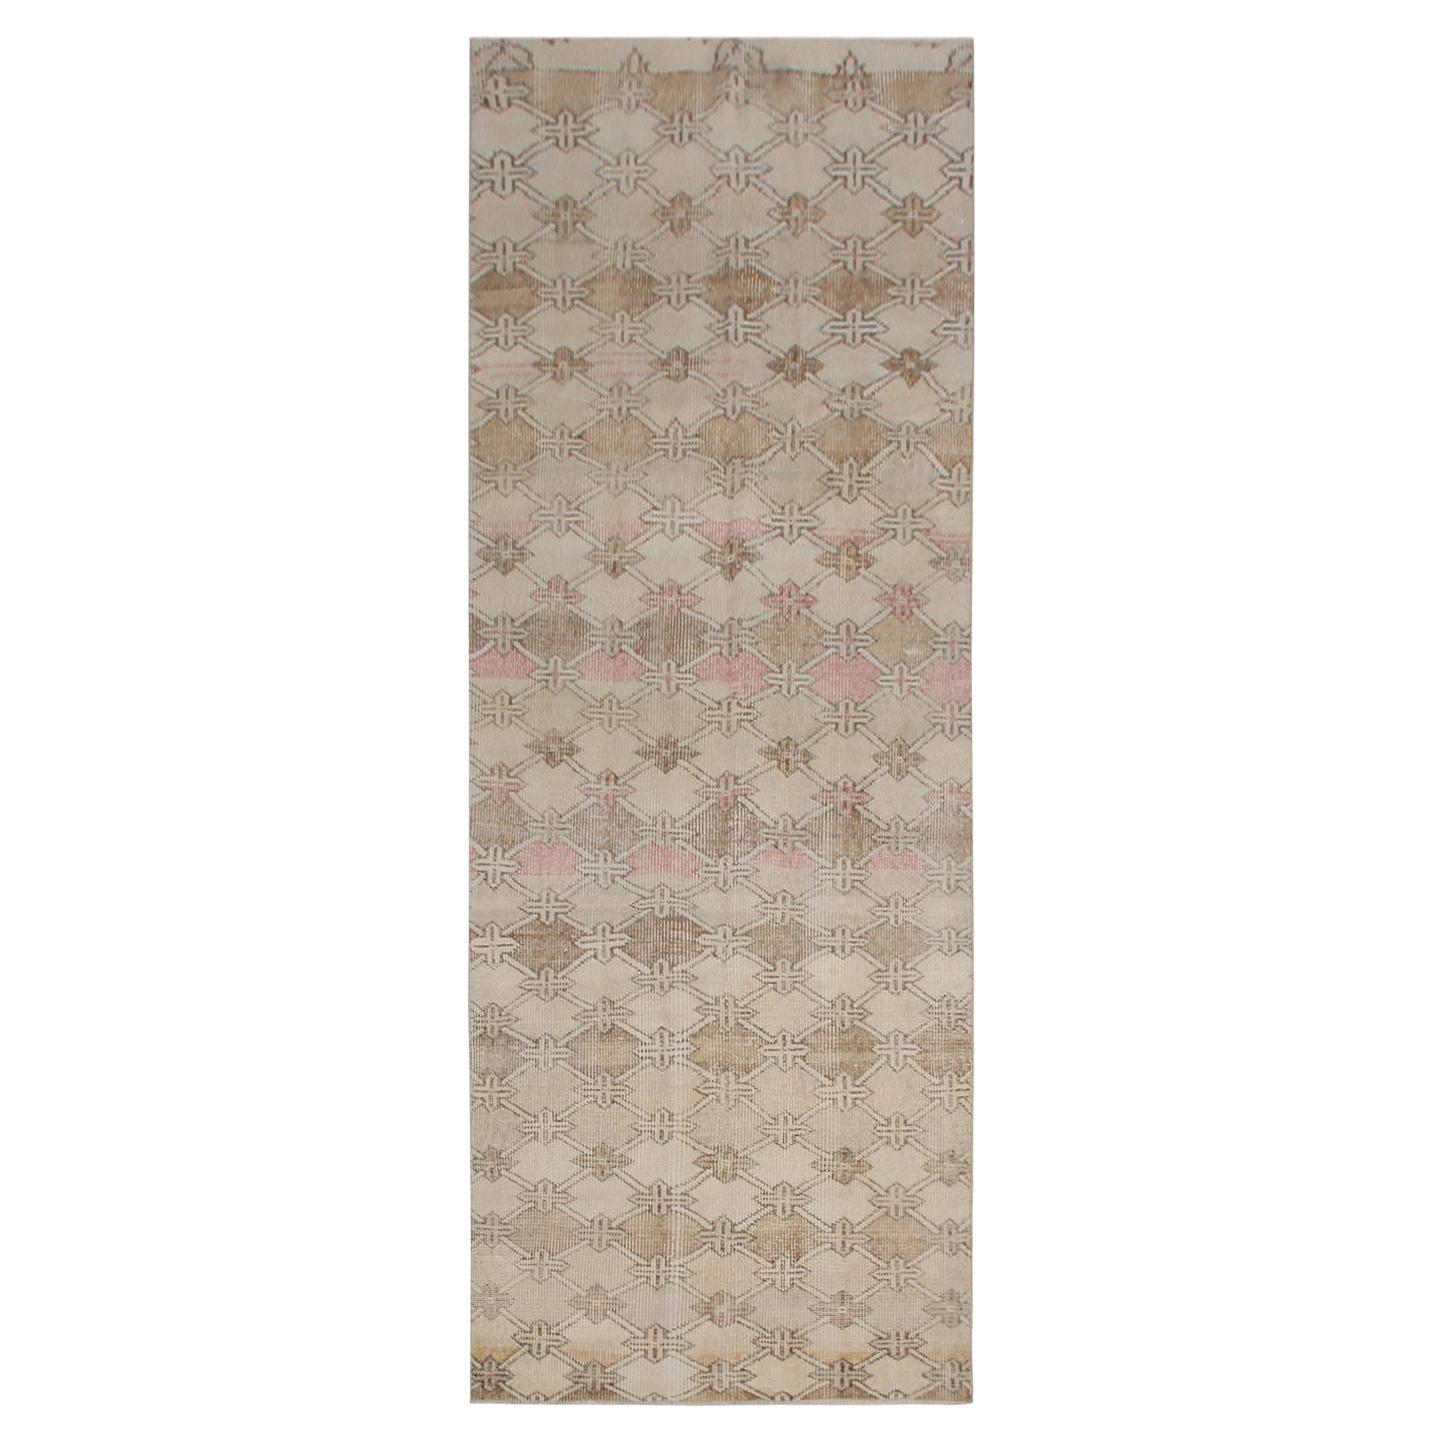 Vintage Midcentury Beige and Brown Wool Rug with Pink Accents